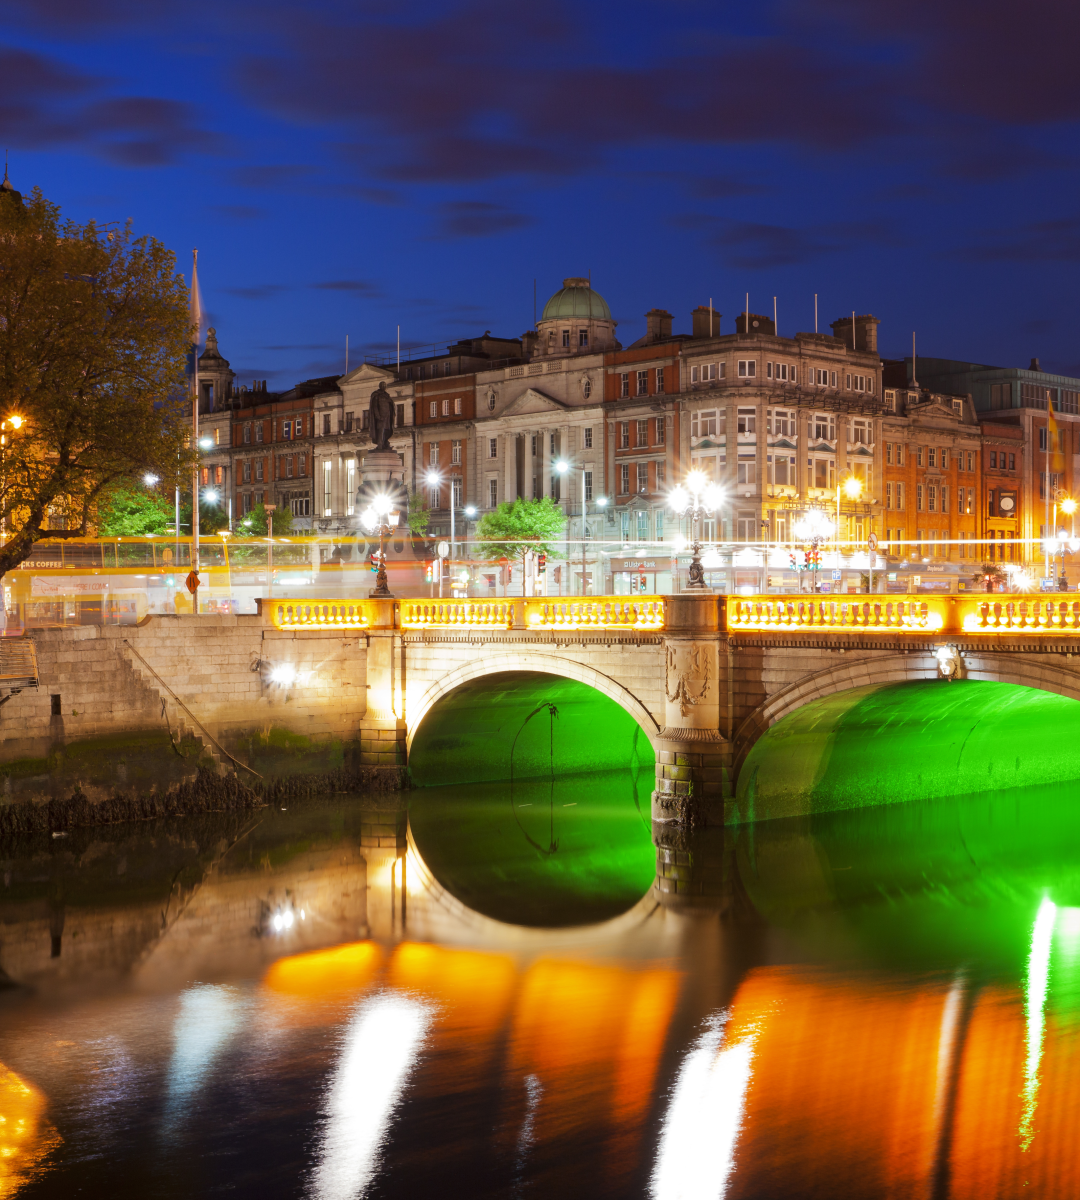 The river liffy in Dublin at night